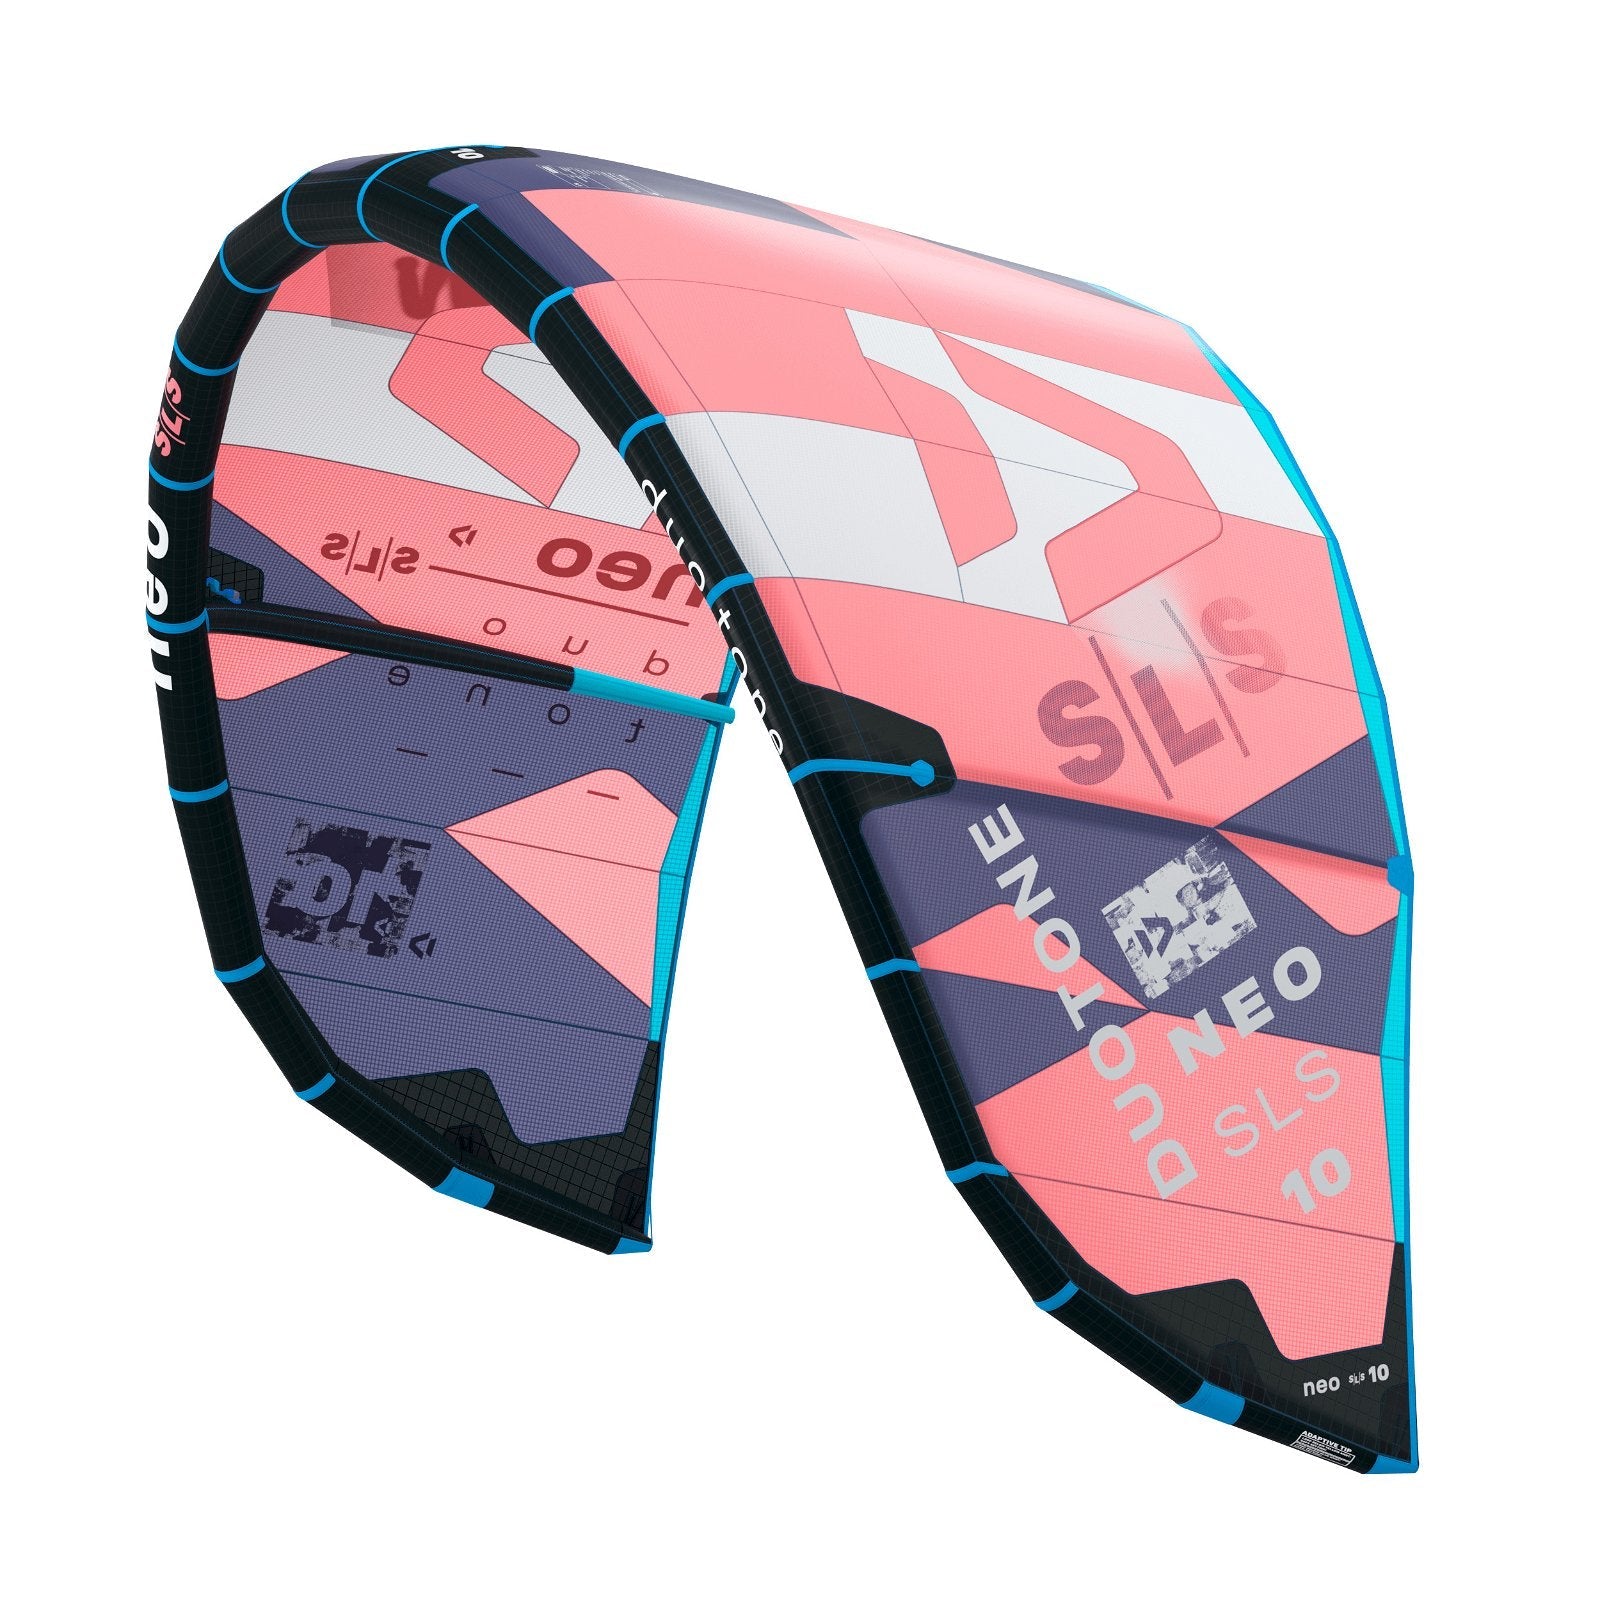 Duotone Neo SLS 2023-Duotone Kiteboarding-05.0 m2-C03:coral-red/blue-44230-3014-9010583136684-Surf-store.com